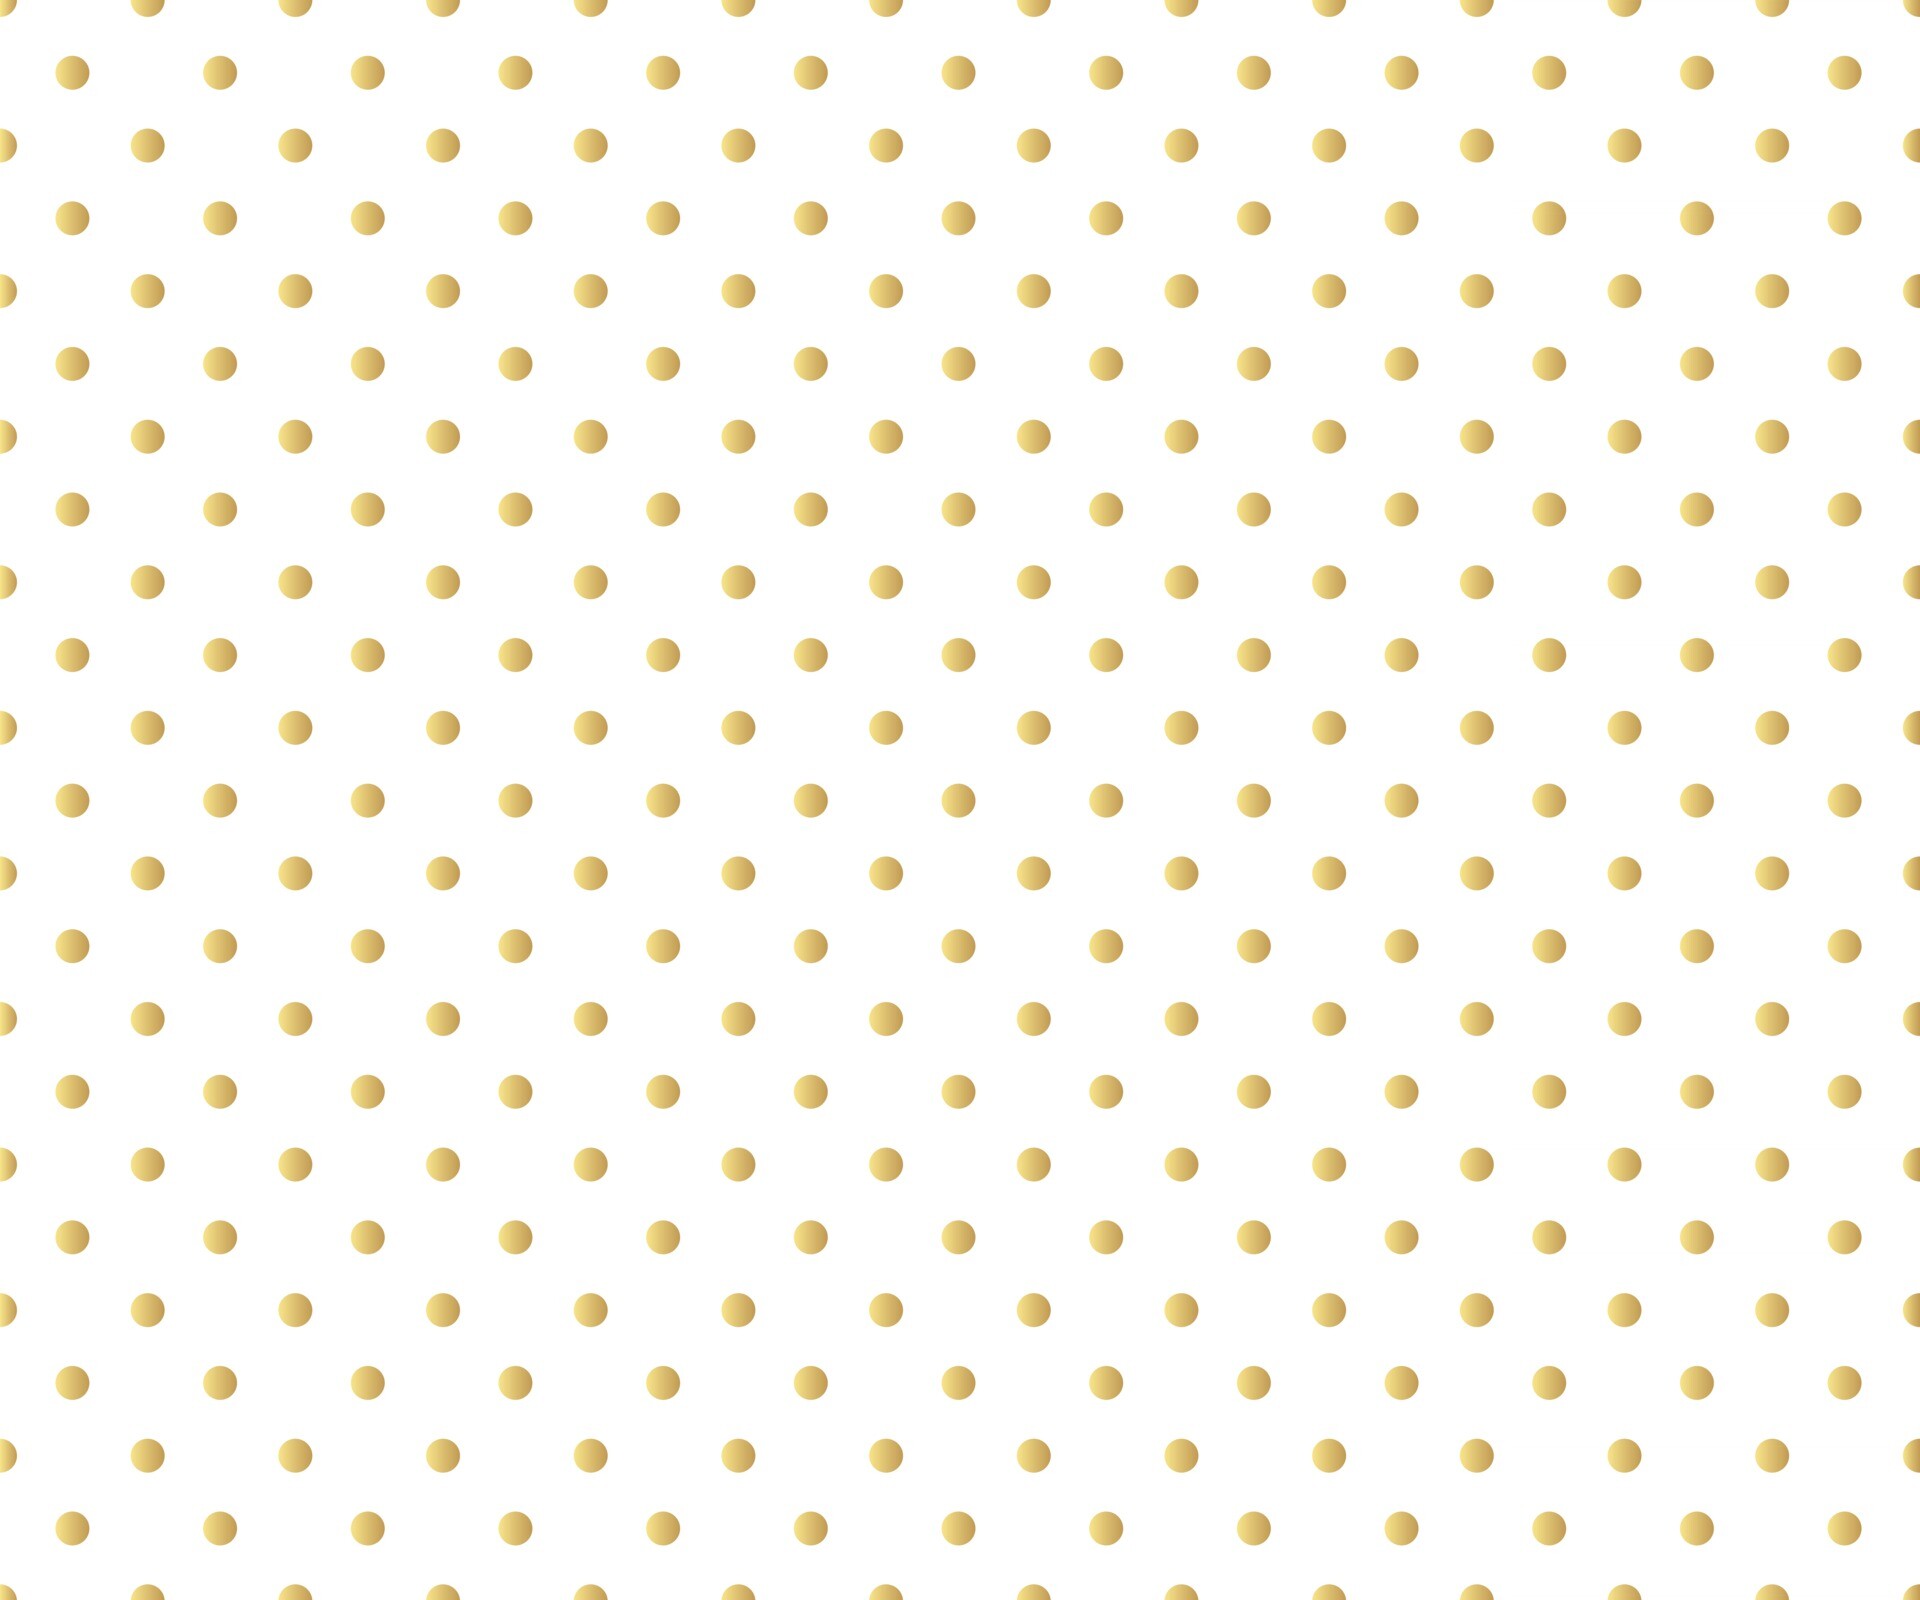 Gold Polka Dot: An array of equally sized and evenly distributed filled circles, Golden dots on a white background. 1920x1600 HD Wallpaper.